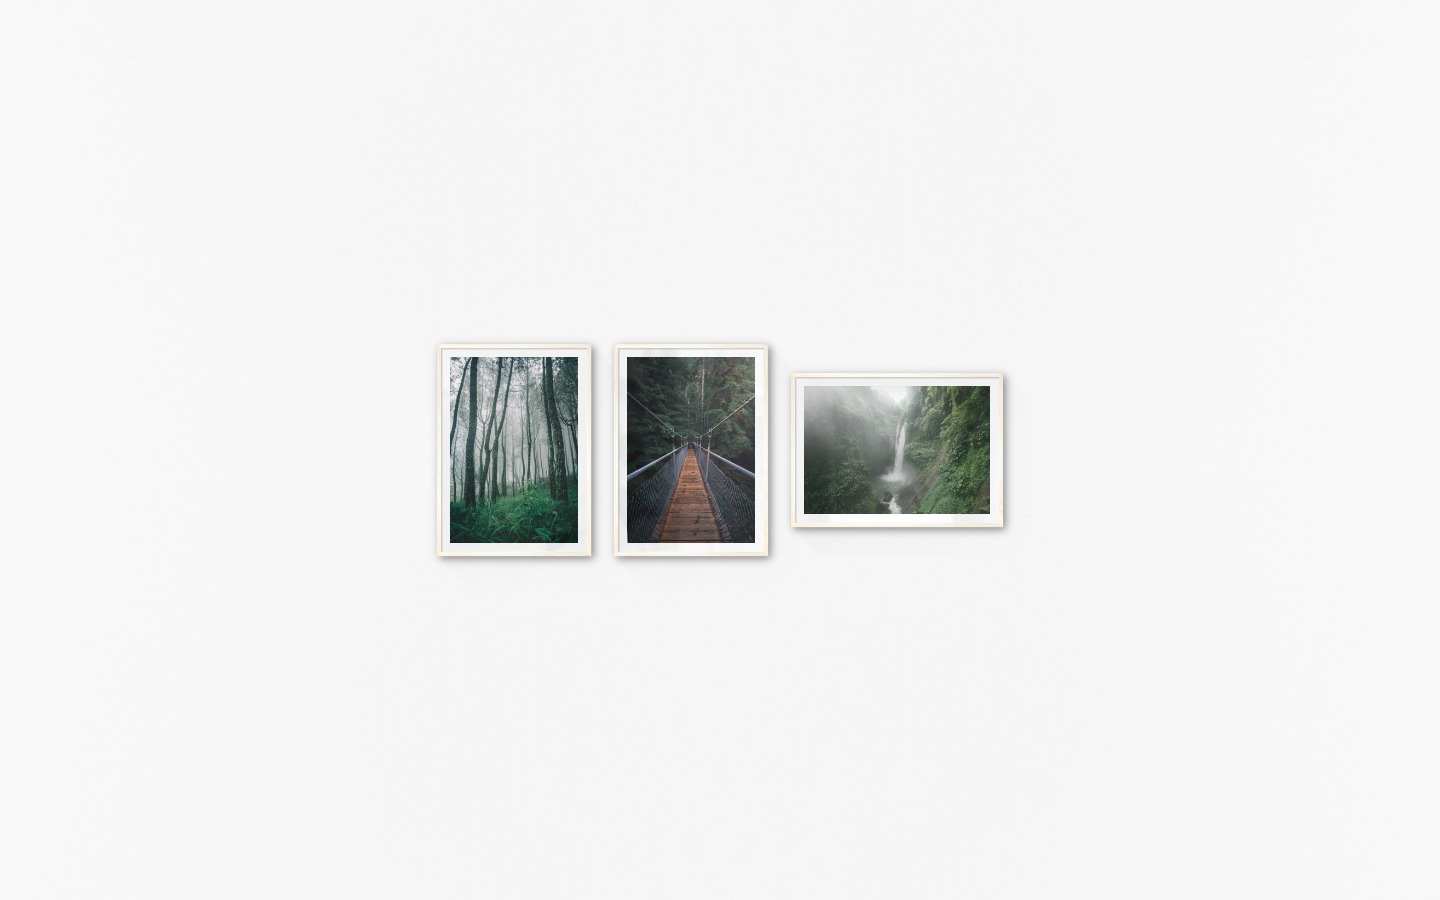 Gallery wall with picture frames in light wood in sizes 50x70 with prints "Tall trees", "Bridge in the woods" and "Waterfall in forest"